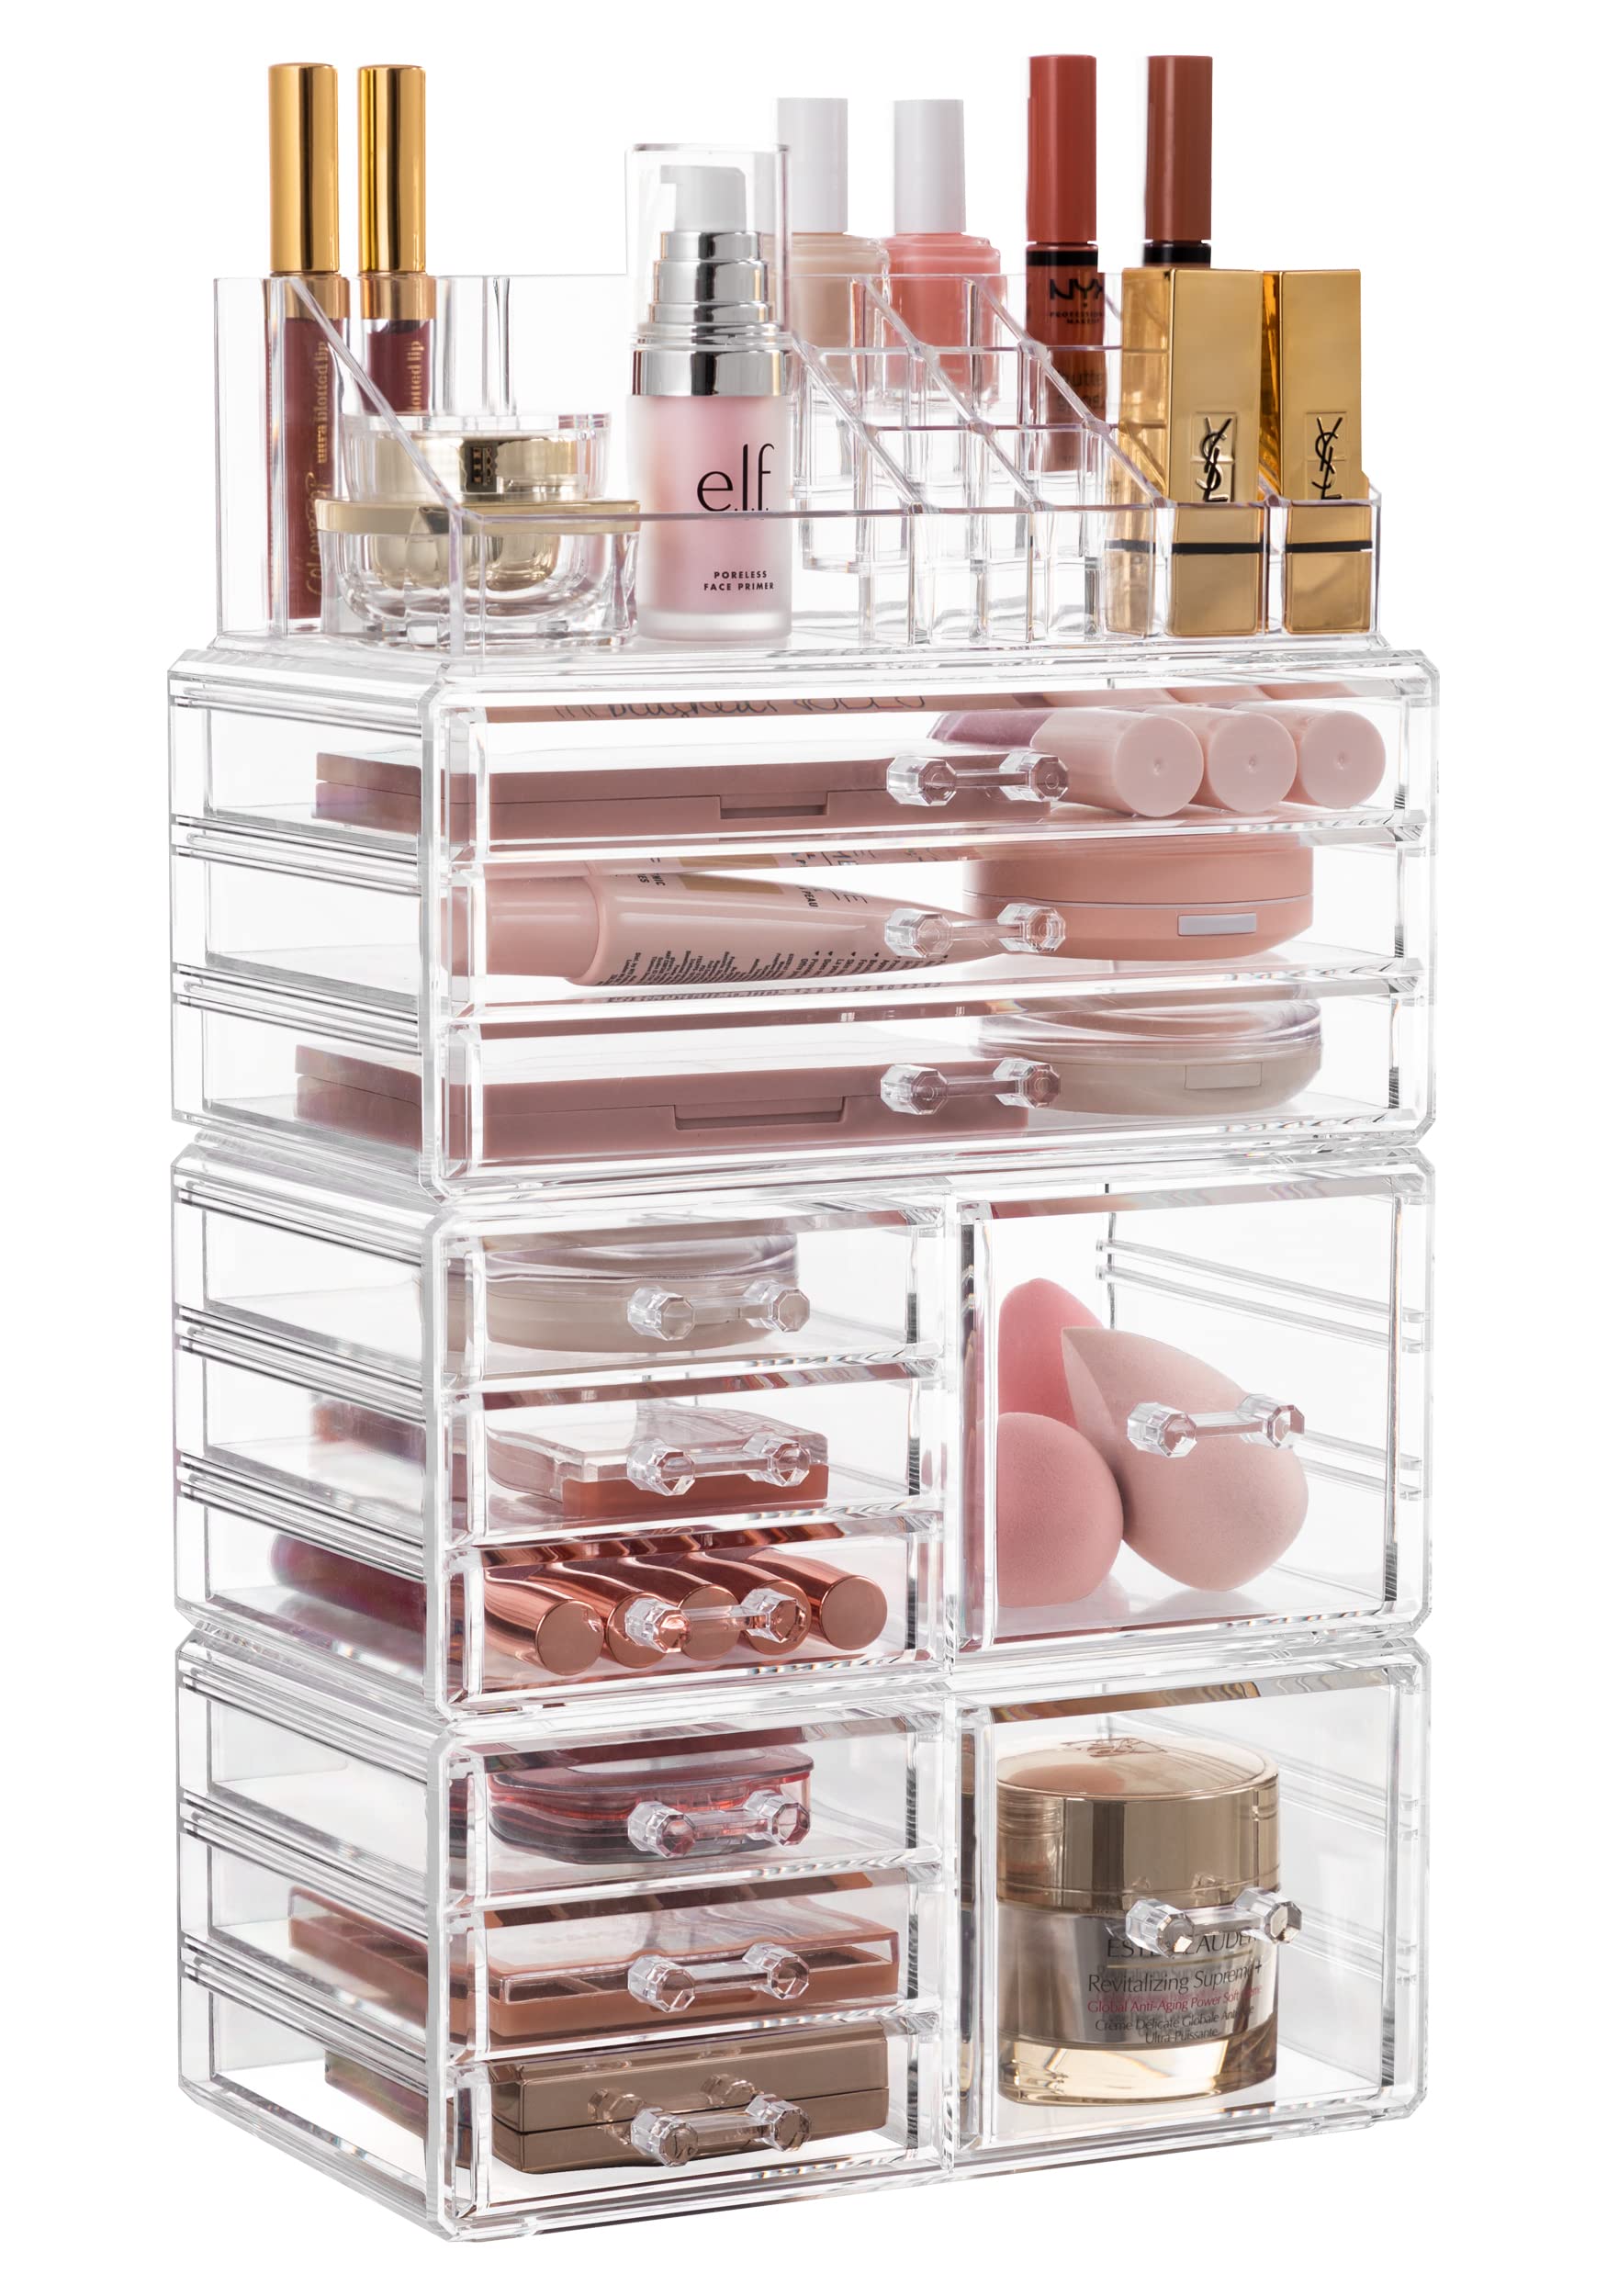 HBlife Acrylic Clear Dustproof Makeup Storage Organizer Drawers Large Skin Care Cosmetic Display Cases for Bathroom Stackable St